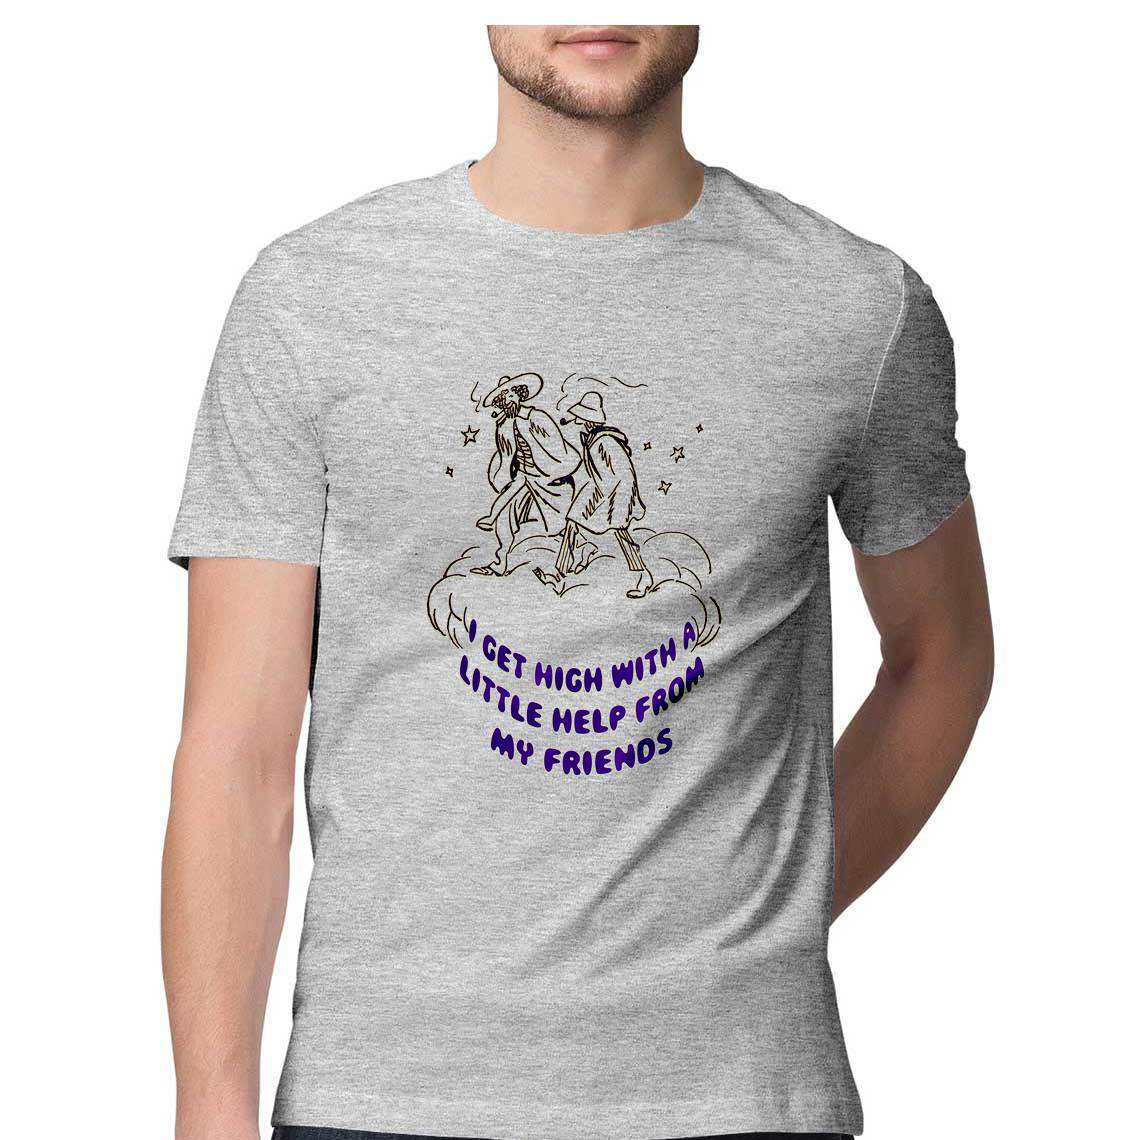 Get High With A Little Help From My Friends Men's T-Shirt - CBD Store India